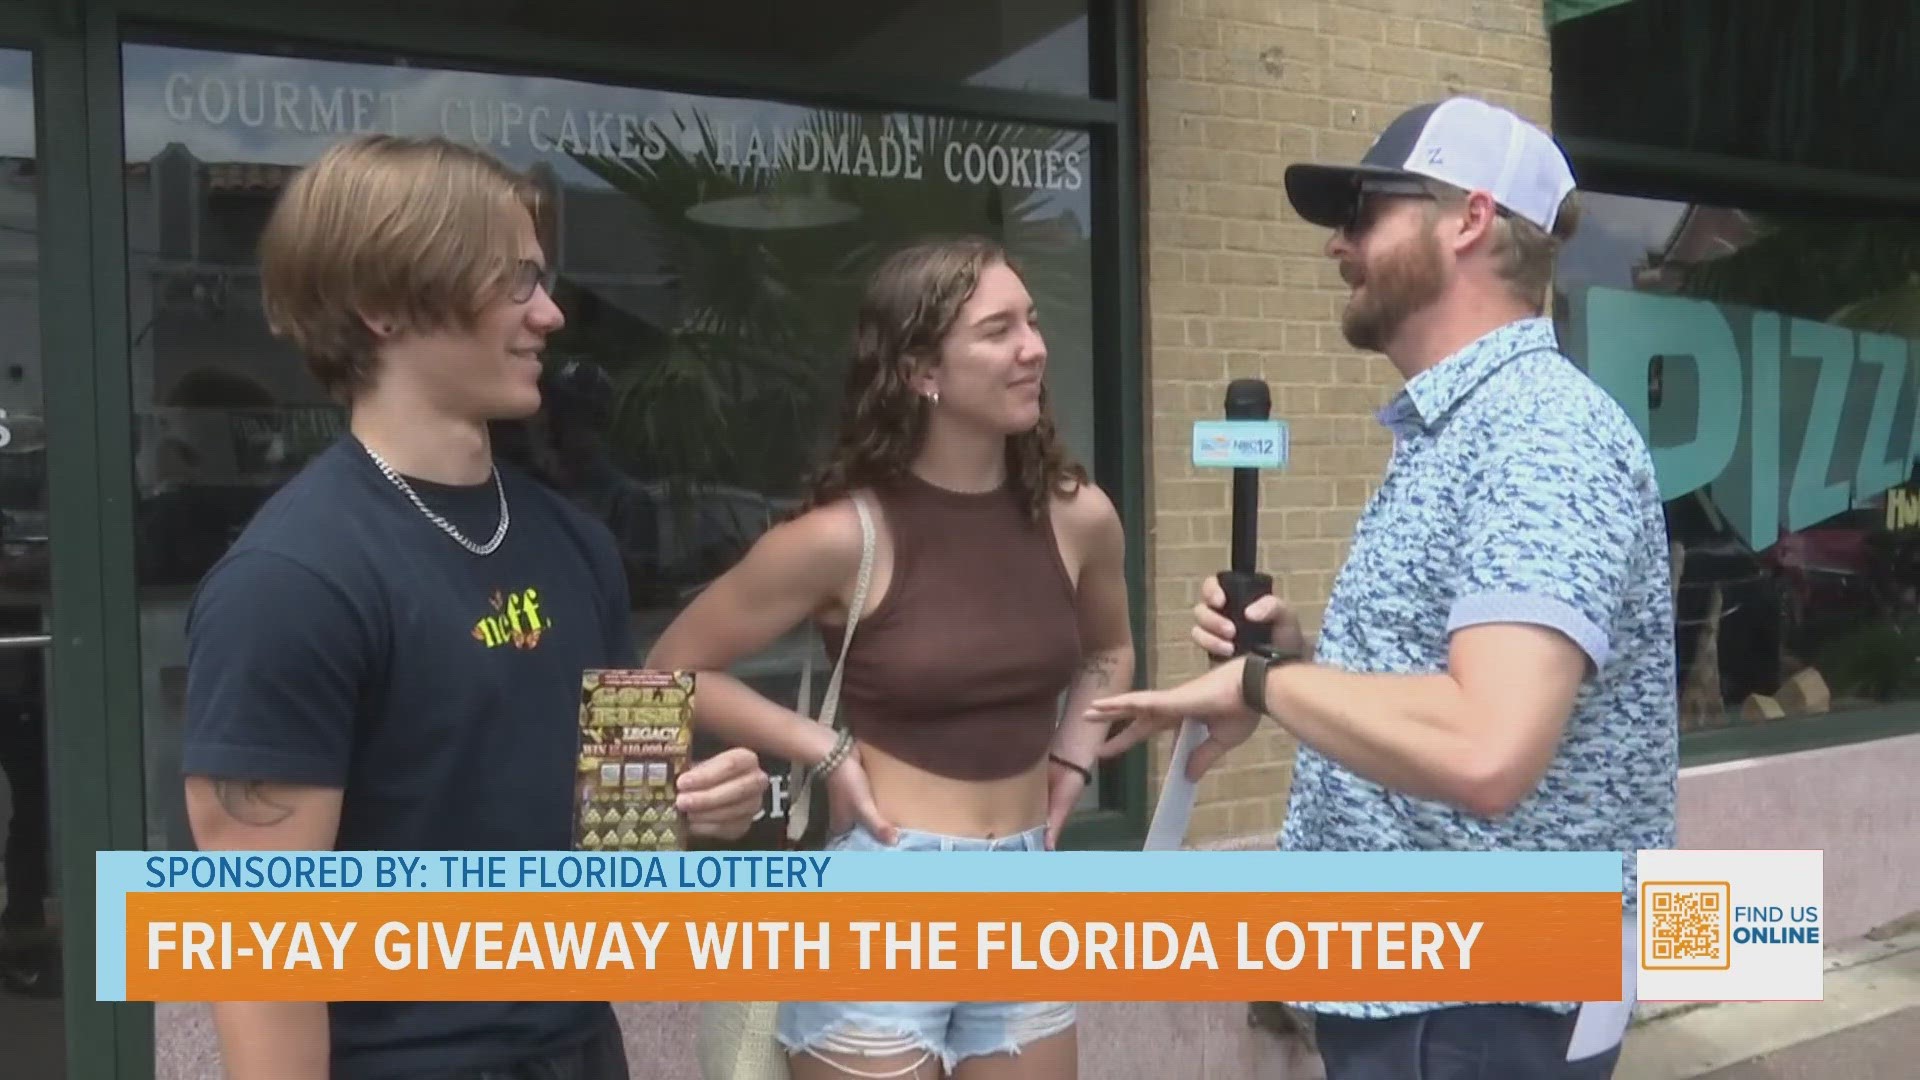 Sponsored by: The Florida Lottery